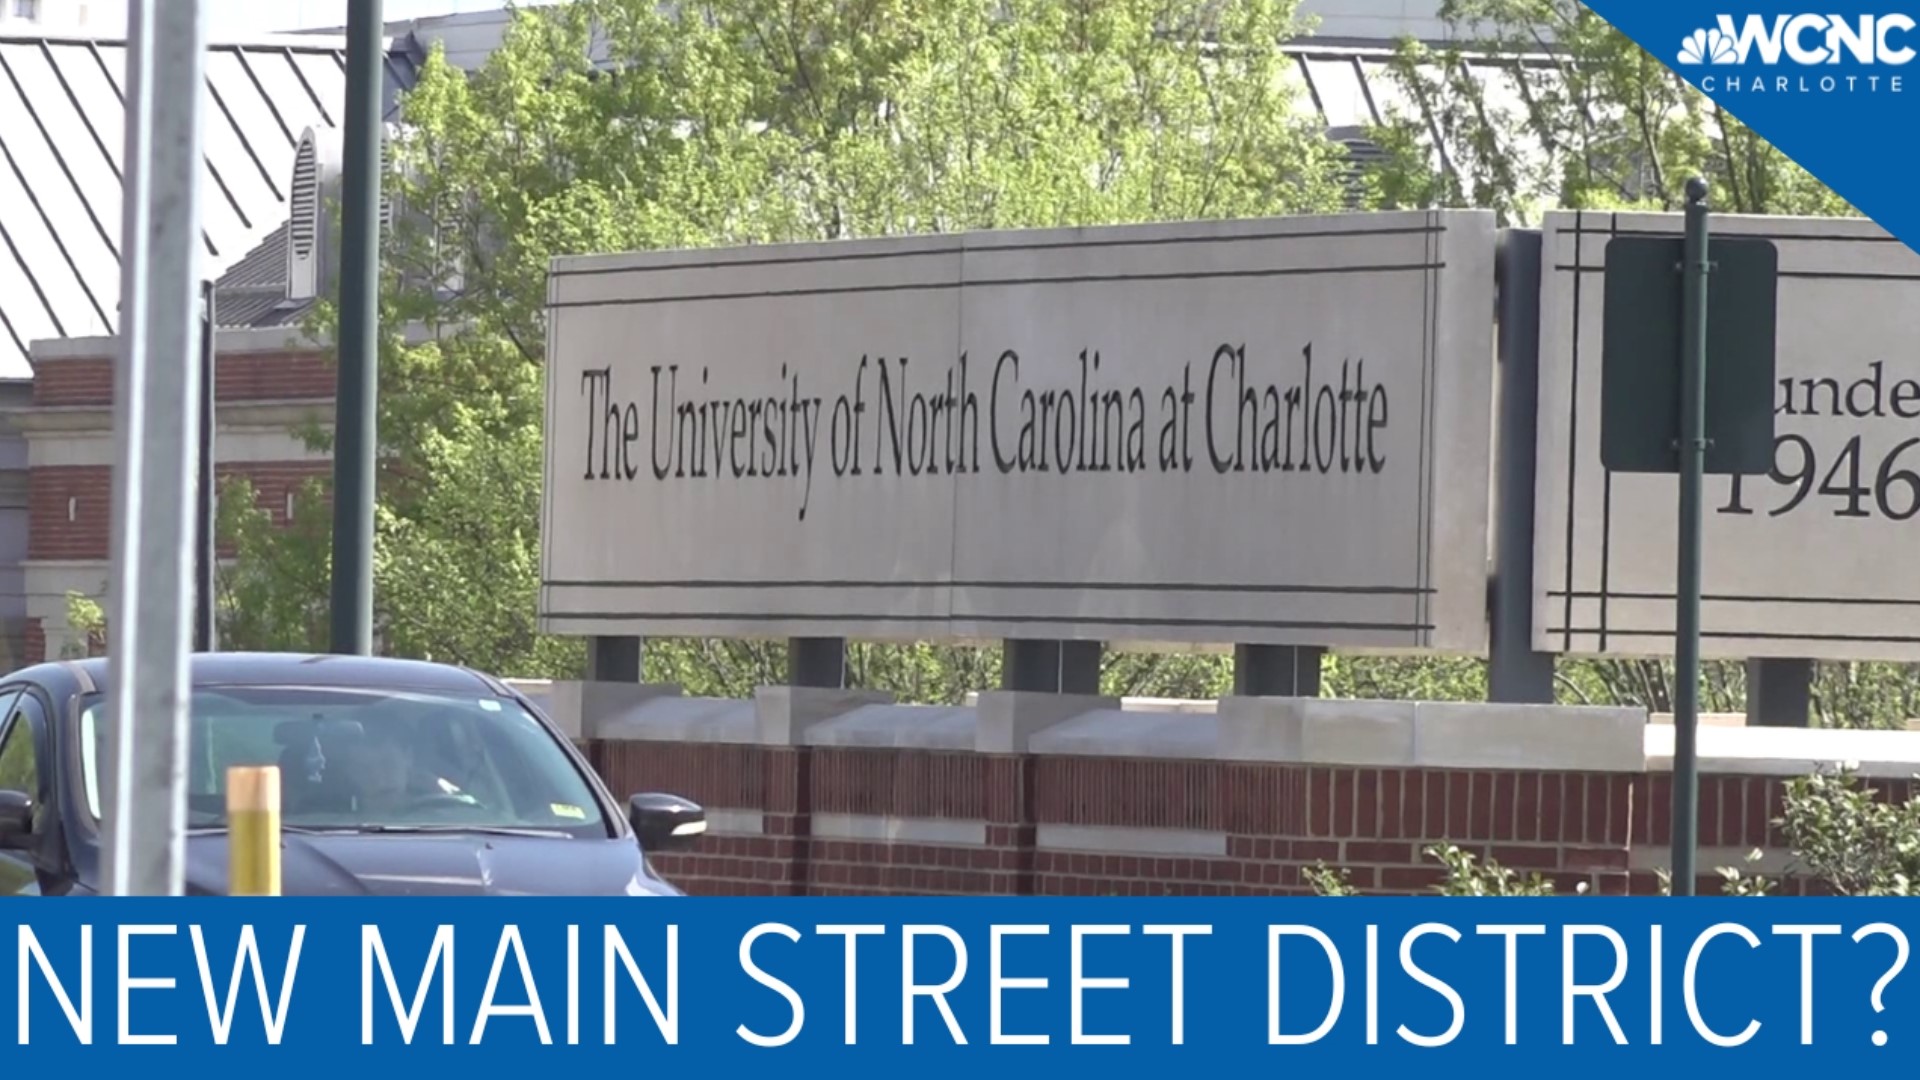 Developers are hoping to build a new student-centered Main Street district across from UNC Charlotte.